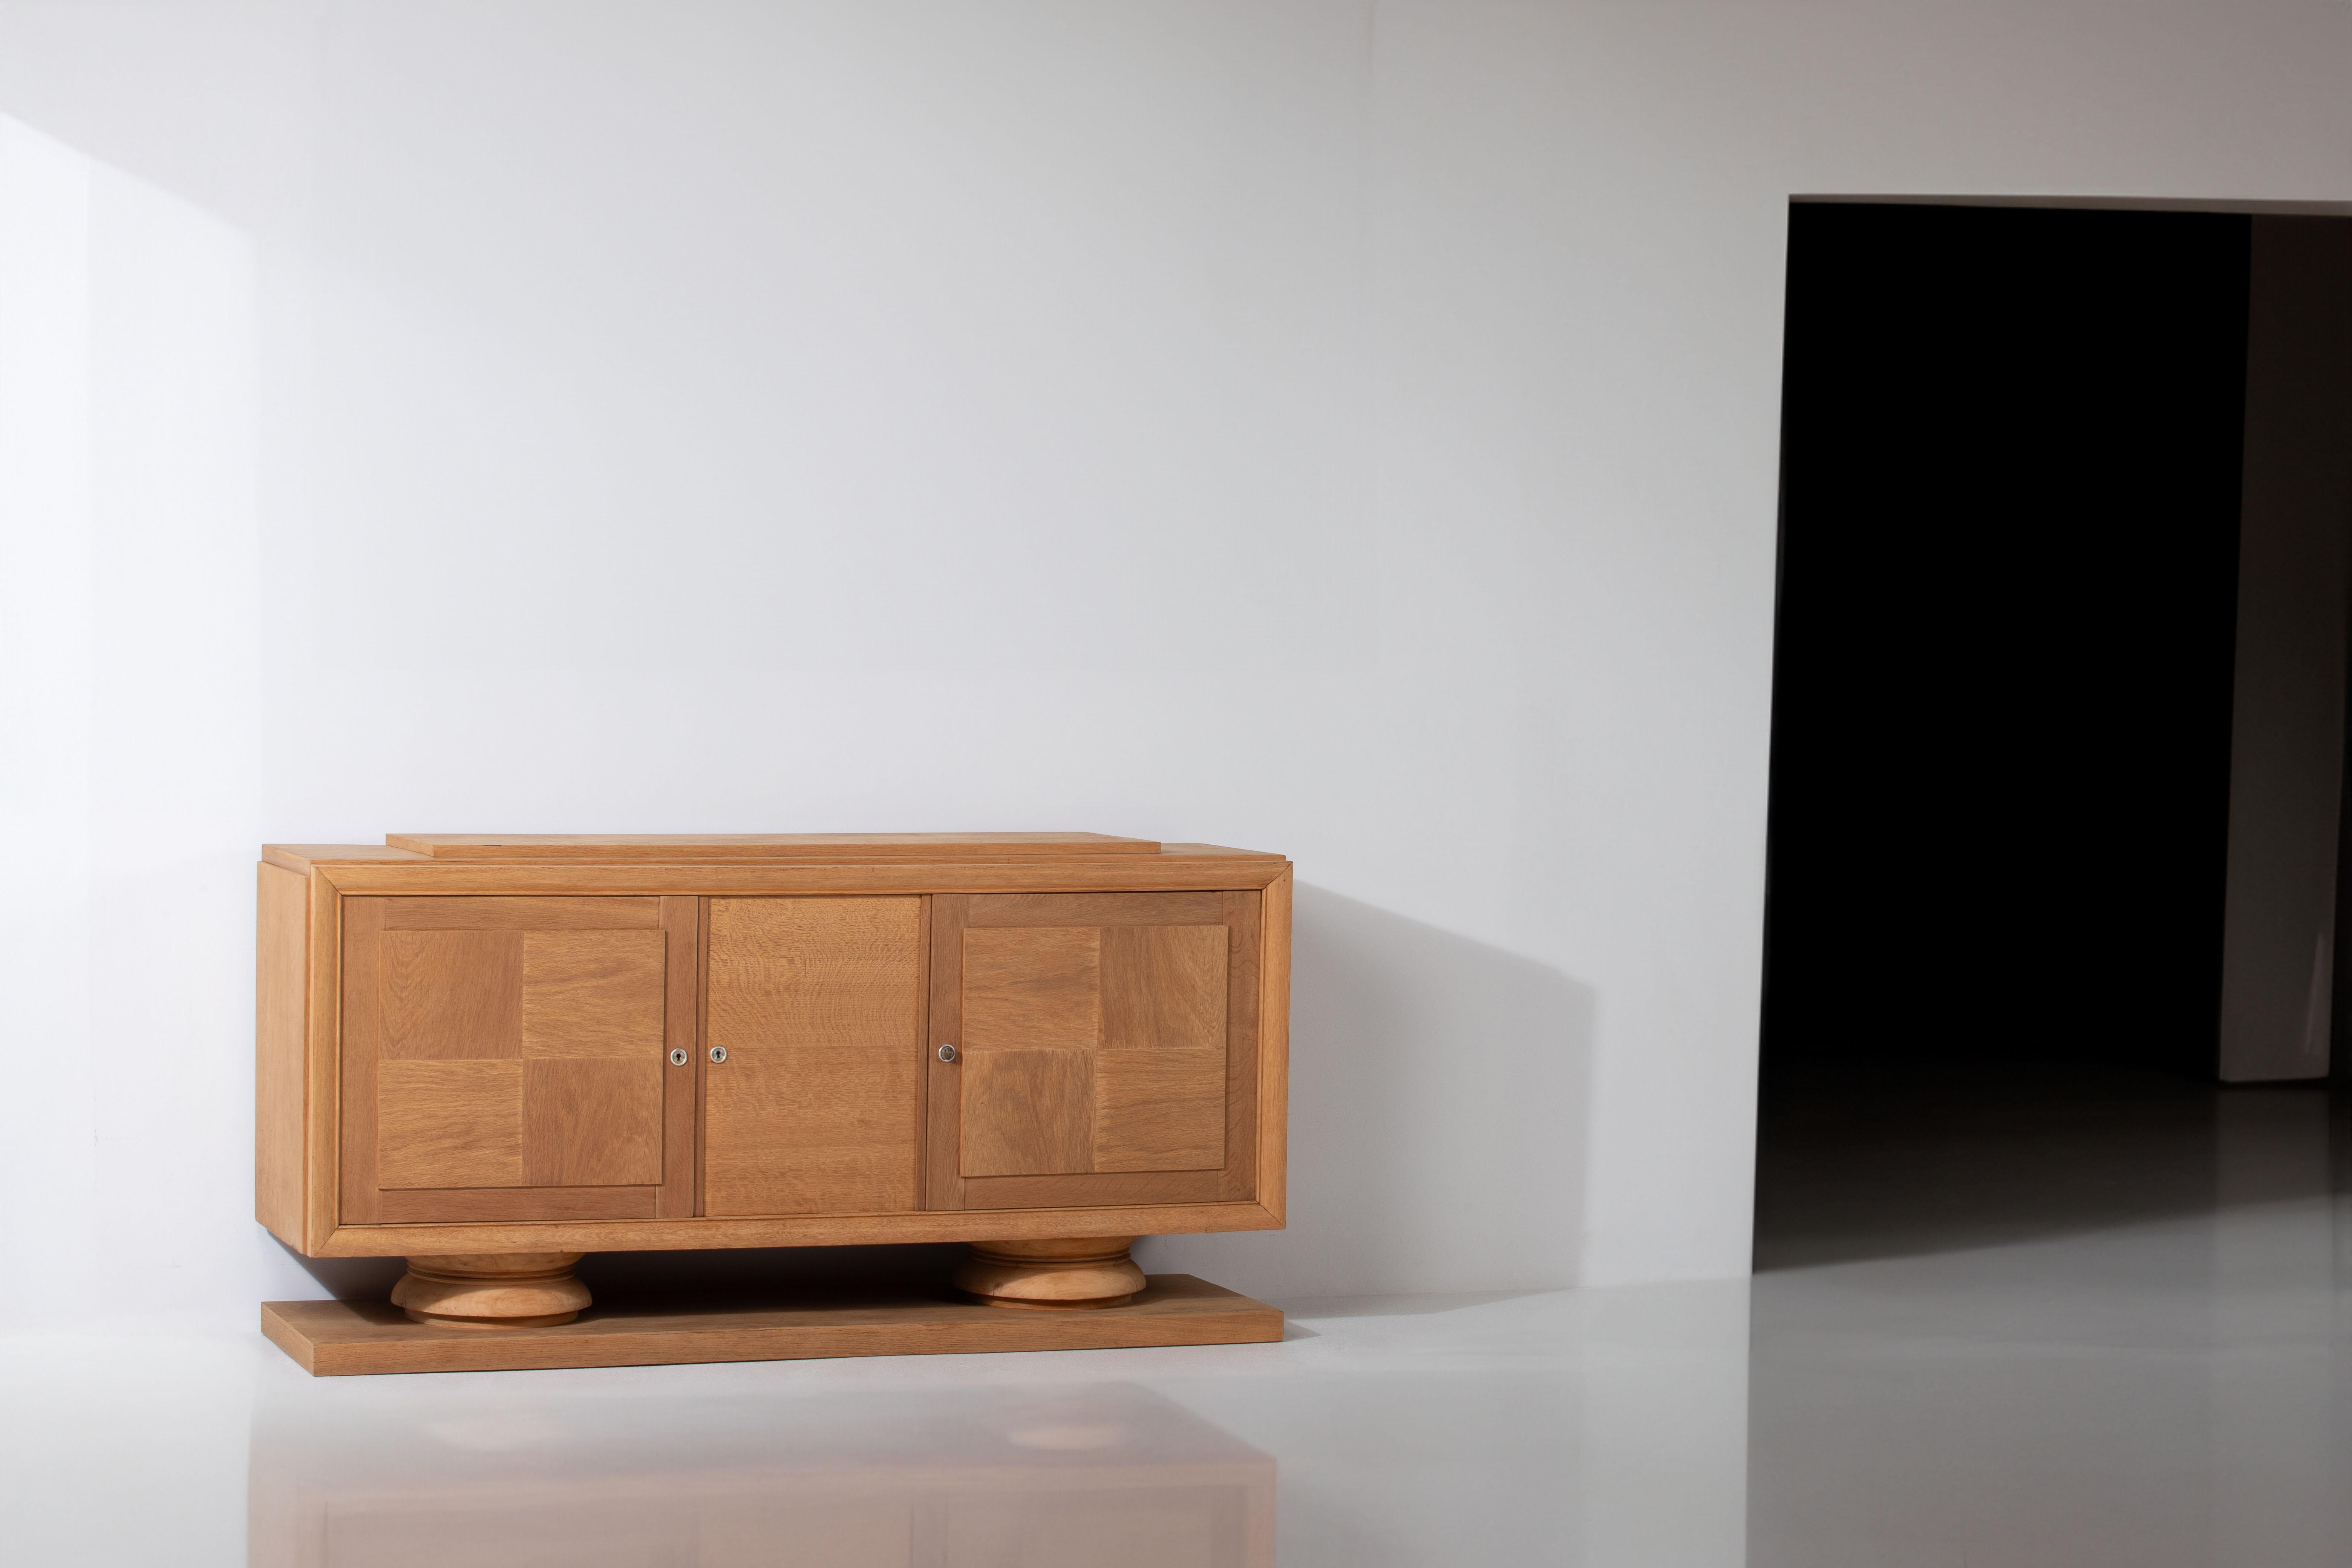 Introducing a sculptural French buffet from the 1940s, crafted with the utmost elegance and sophistication. This remarkable piece features clean lines and minimalistic doors adorned with a charming checked pattern, adding a touch of visual